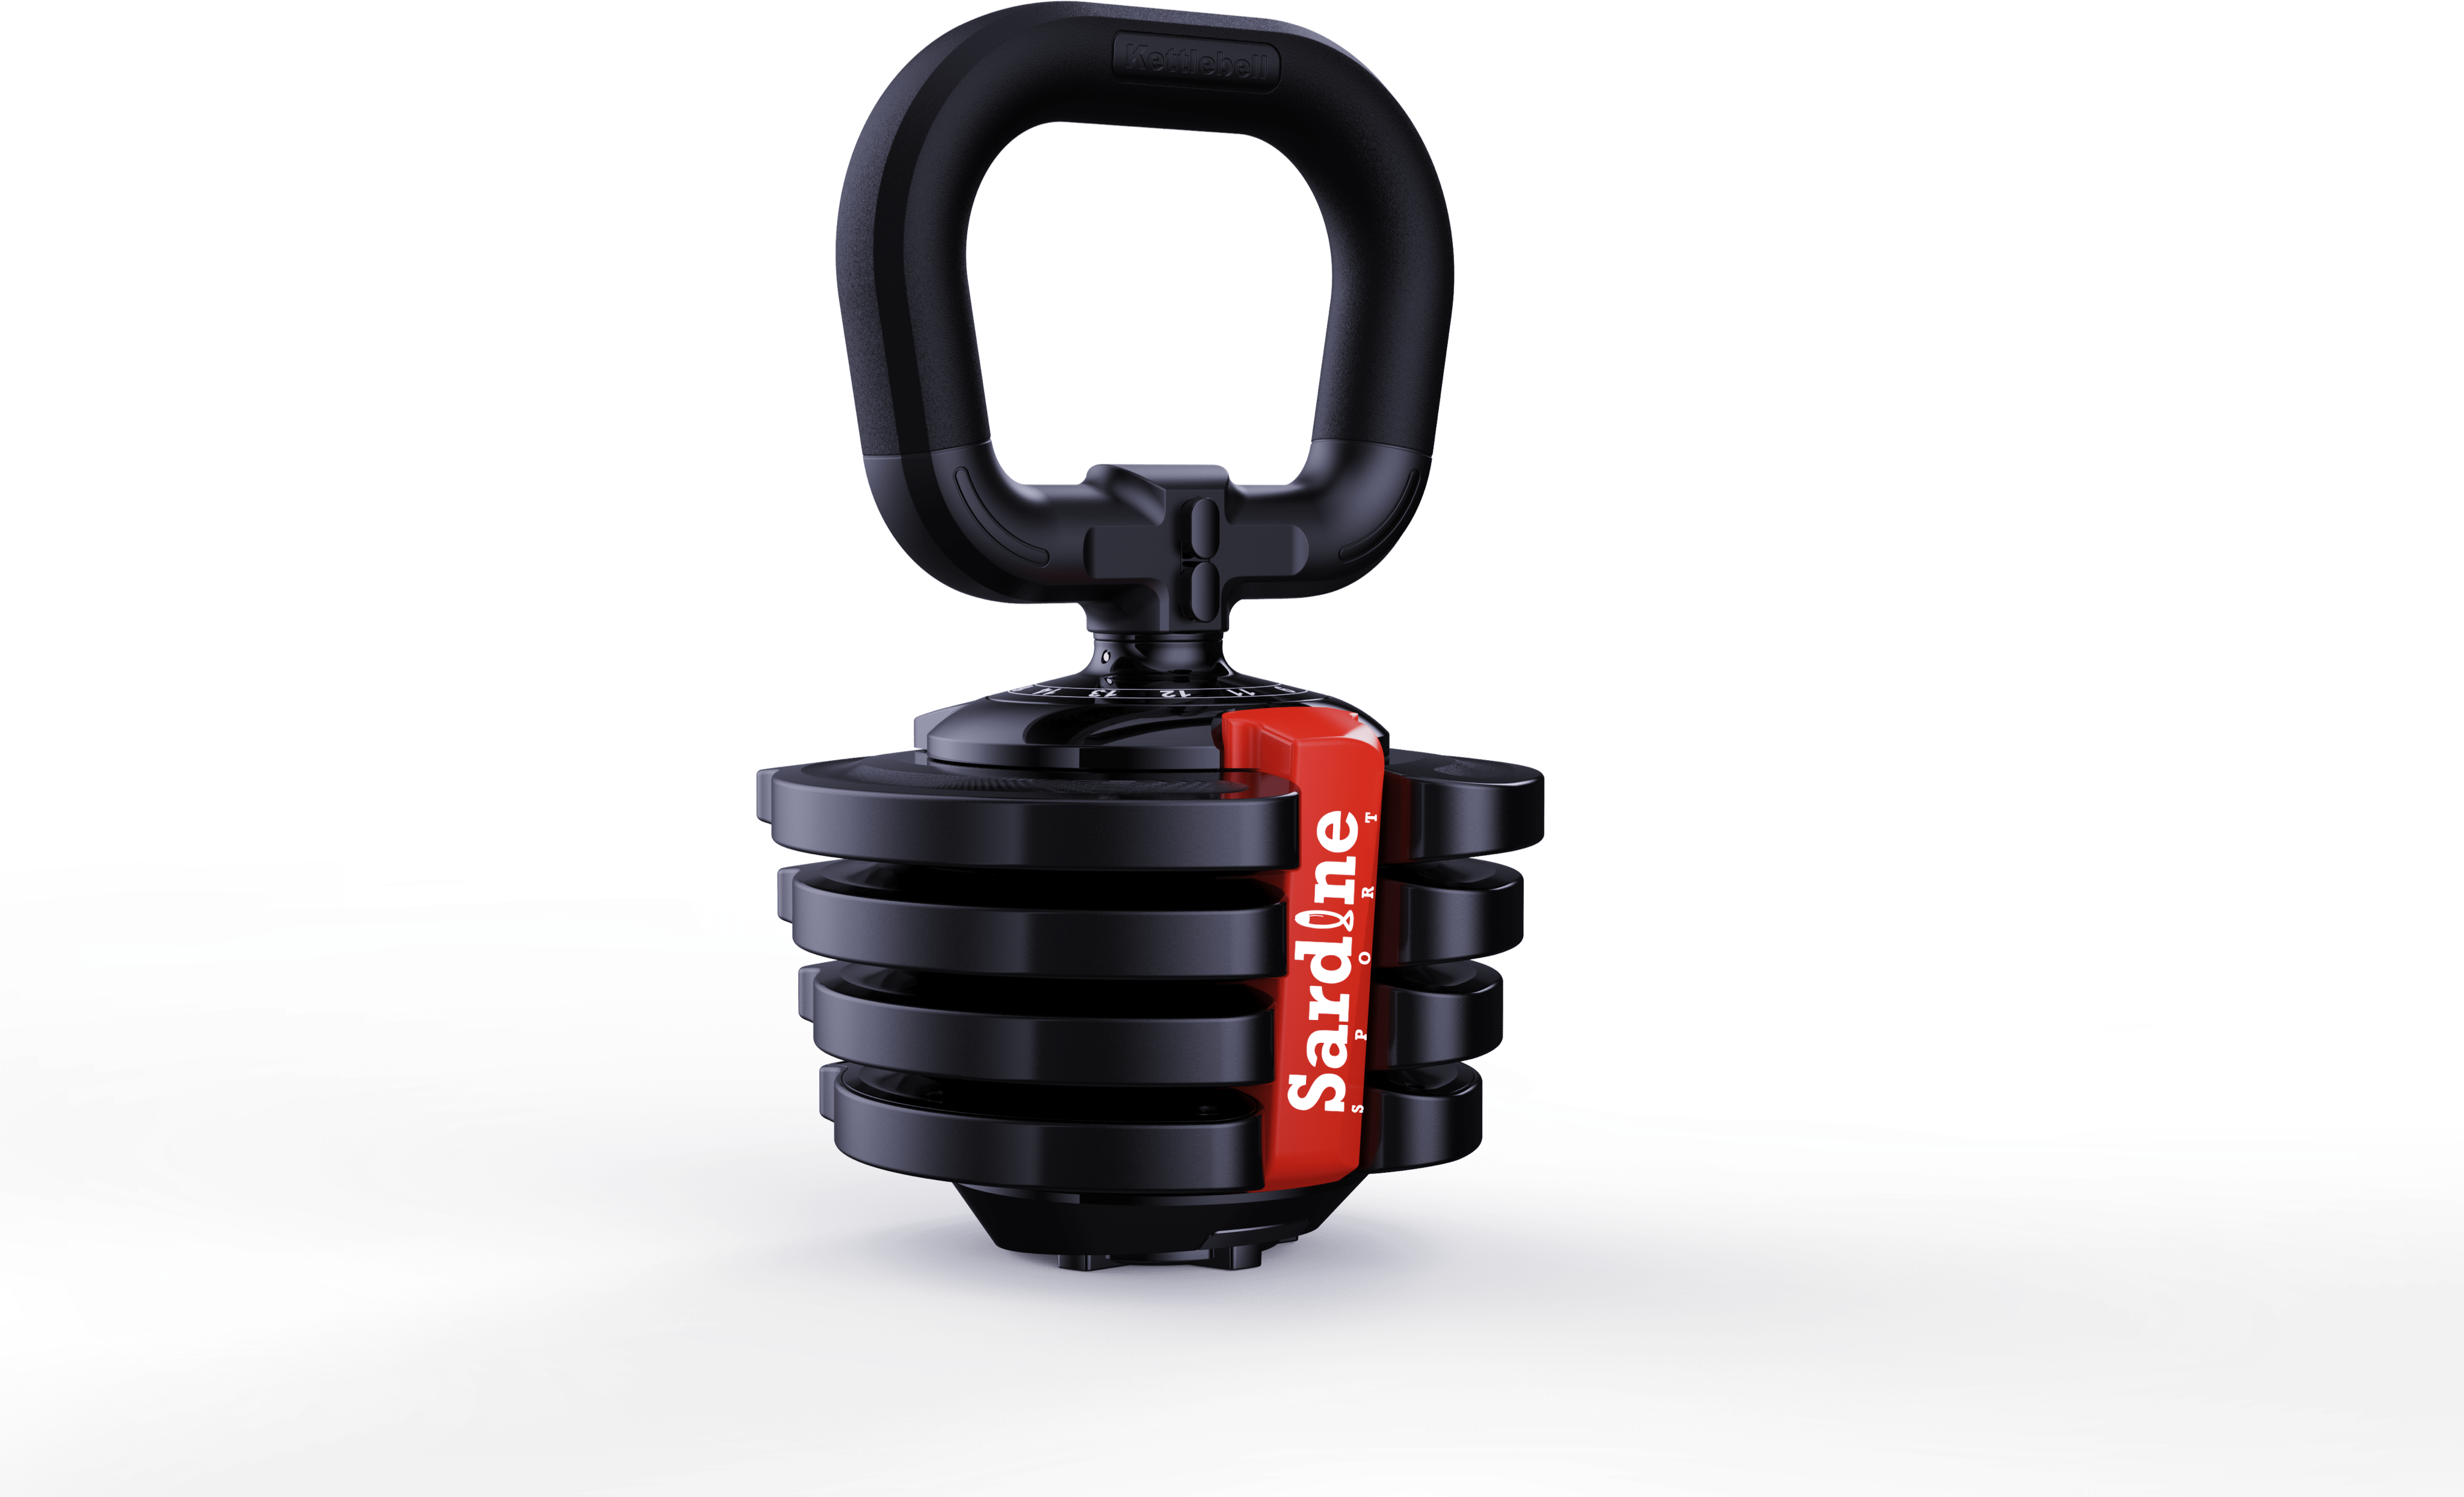 3-In-1 Multi-Functional Adjustable Dumbbell With Twist-Lock, All-In-One With Dumbbell-Barbell-Kettlebell, 1.5KG To 18KG, 3LB To 40LB - Pair